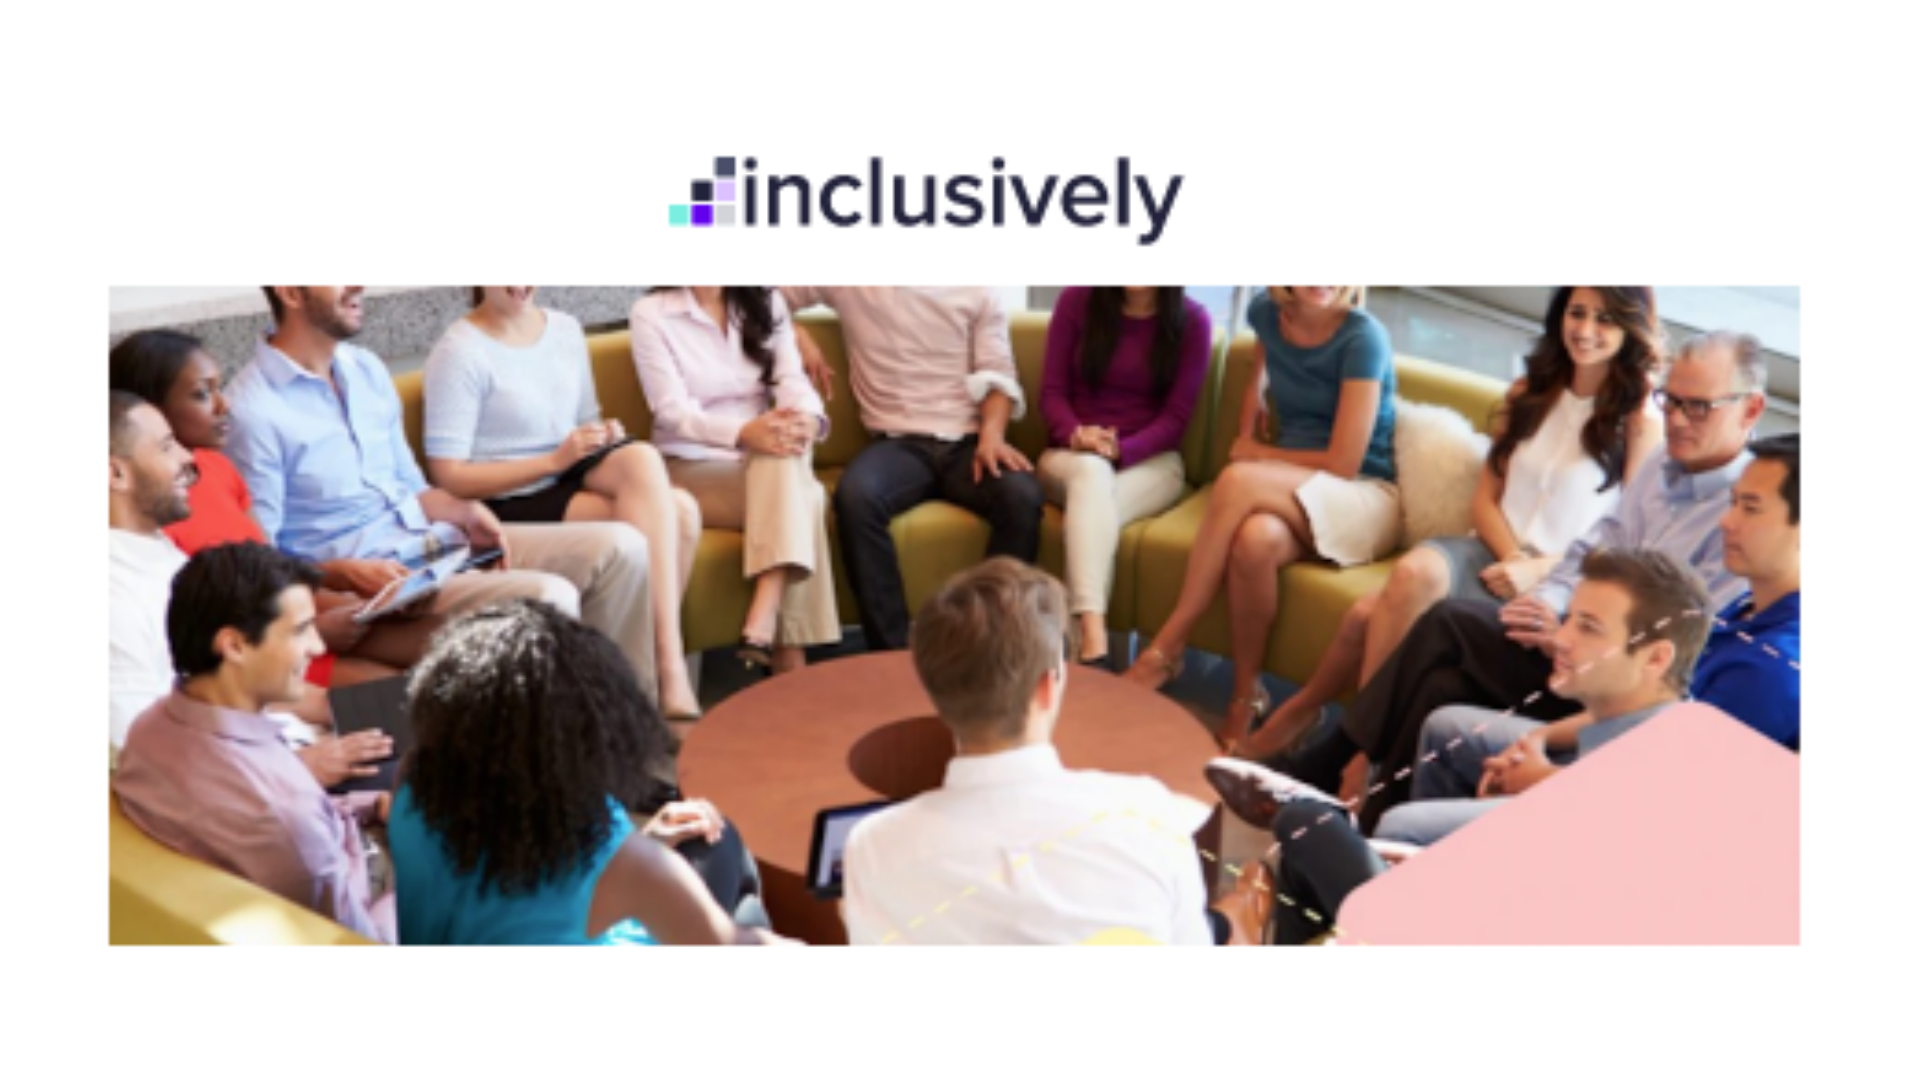 Announcing a partnership with inclusively